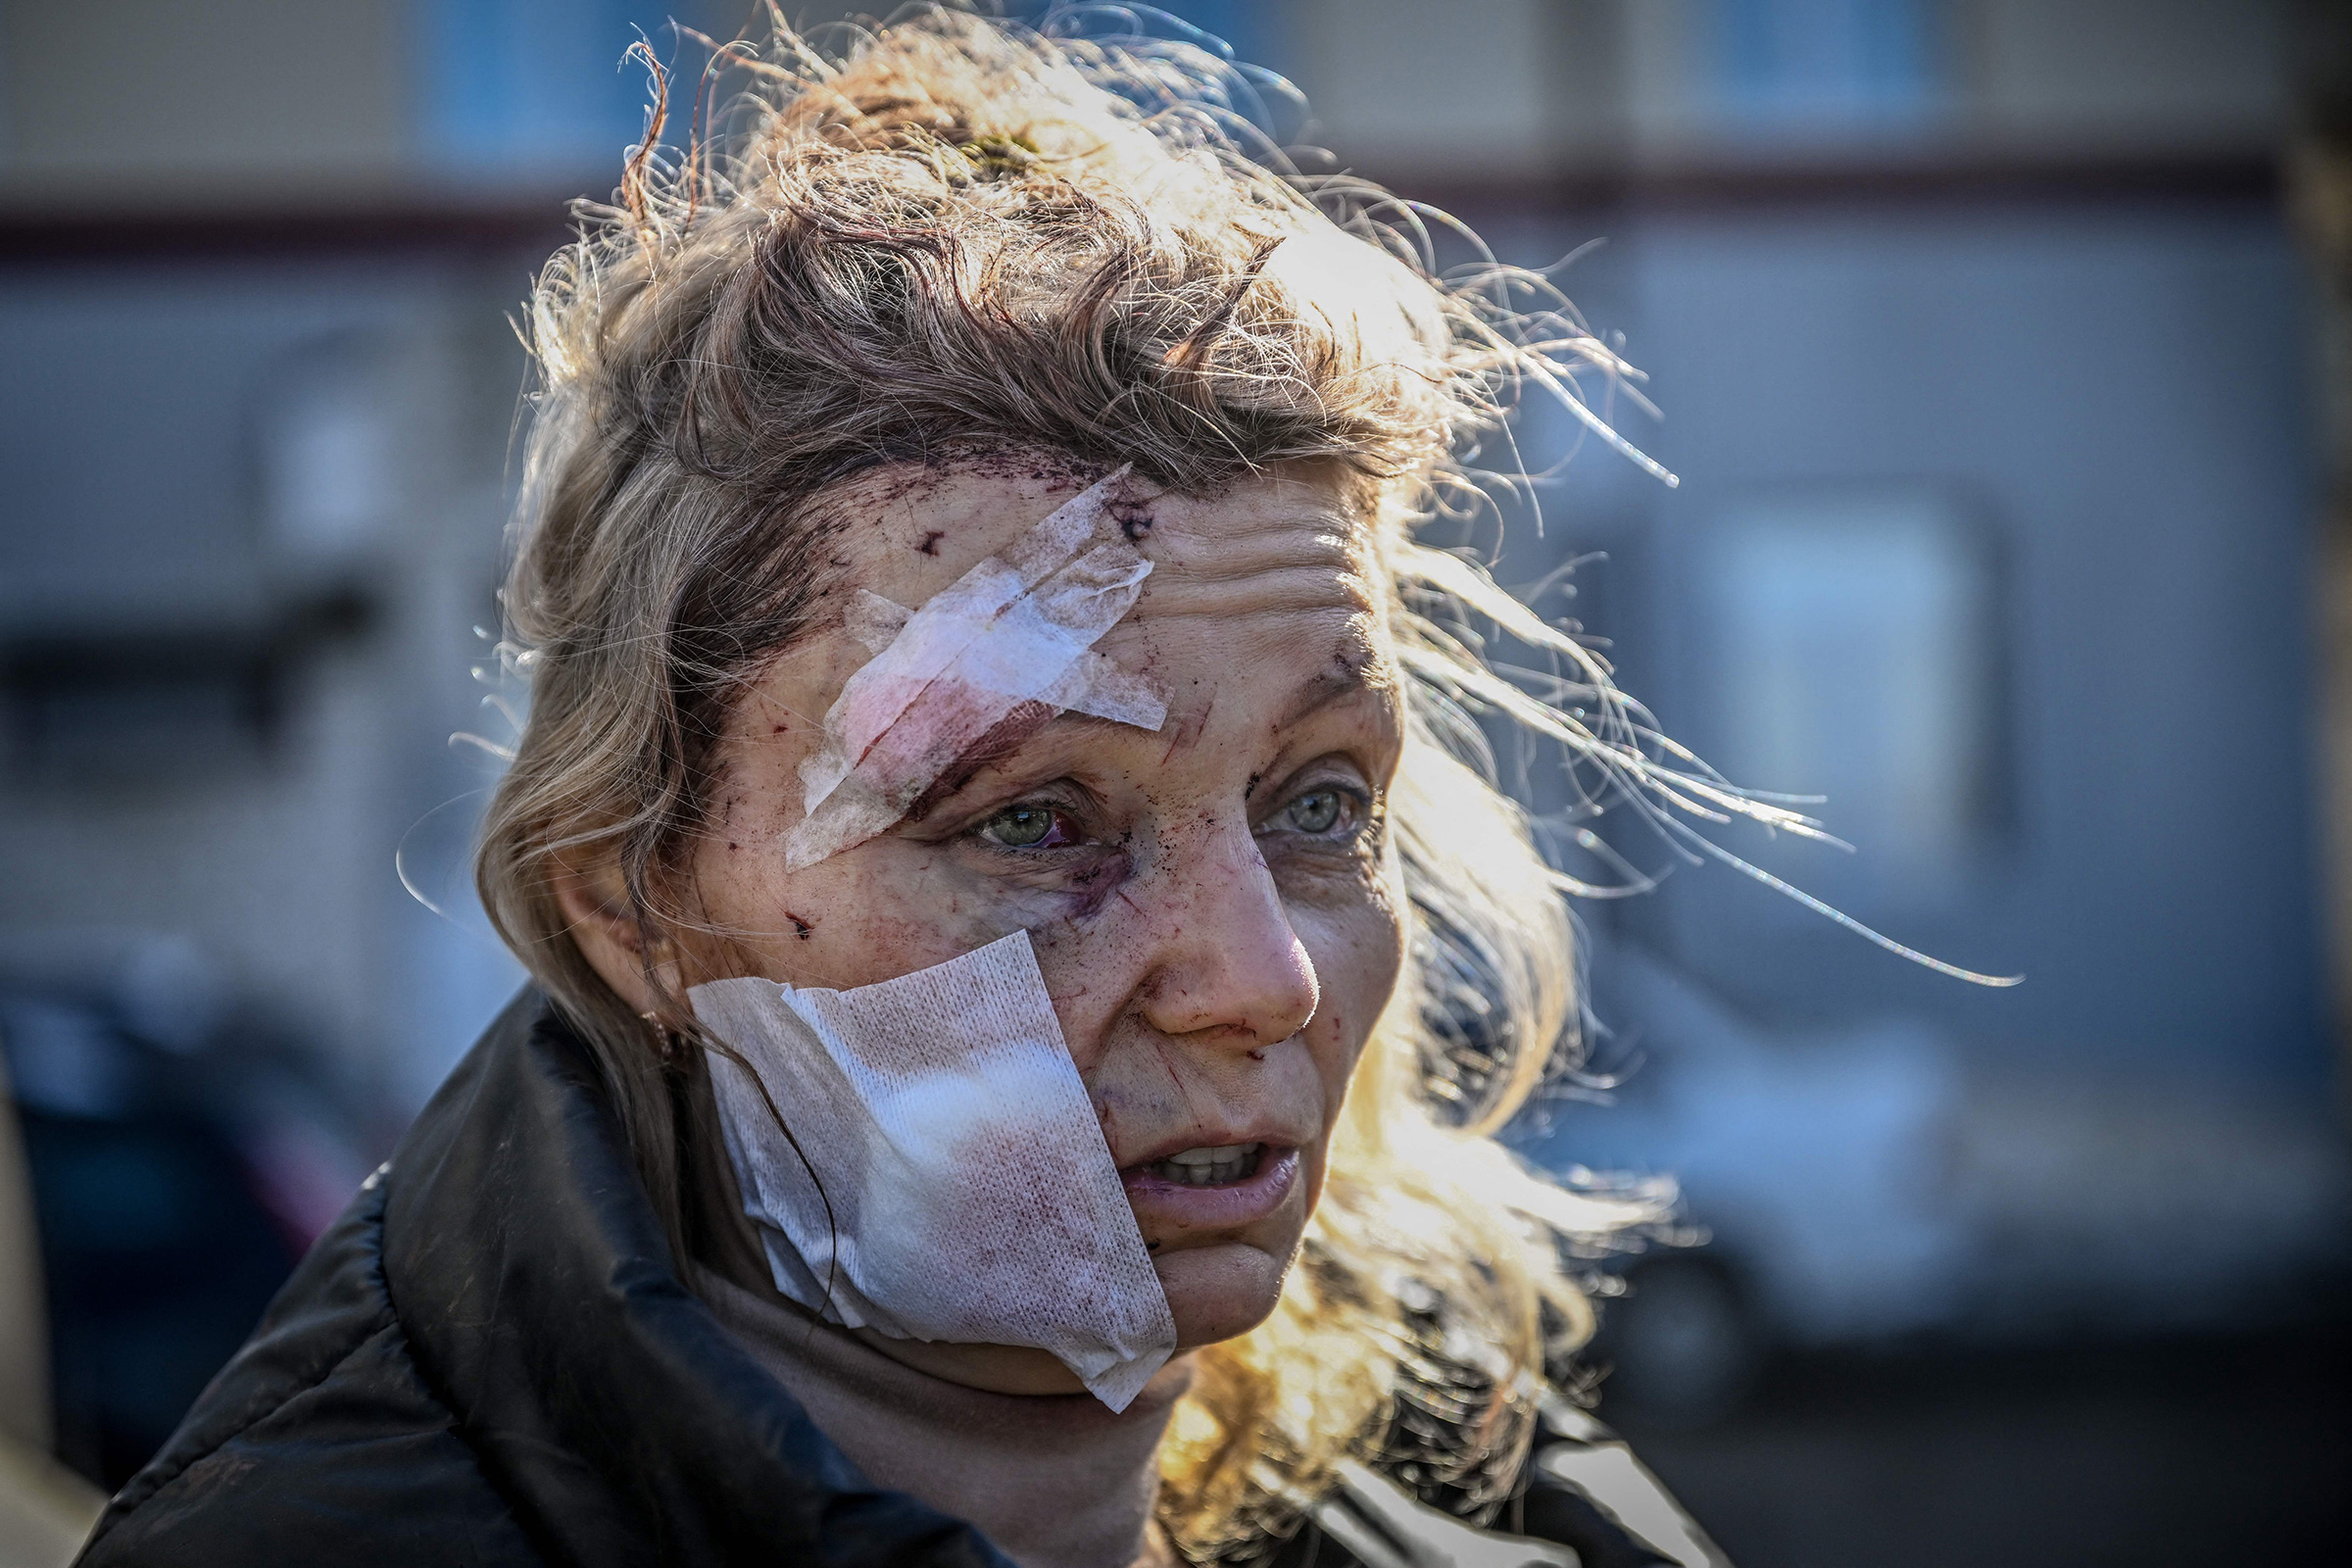 A wounded woman stands outside a hospital after a bombing in Chuguiv in eastern Ukraine, by Russian forces, on Feb. 24.